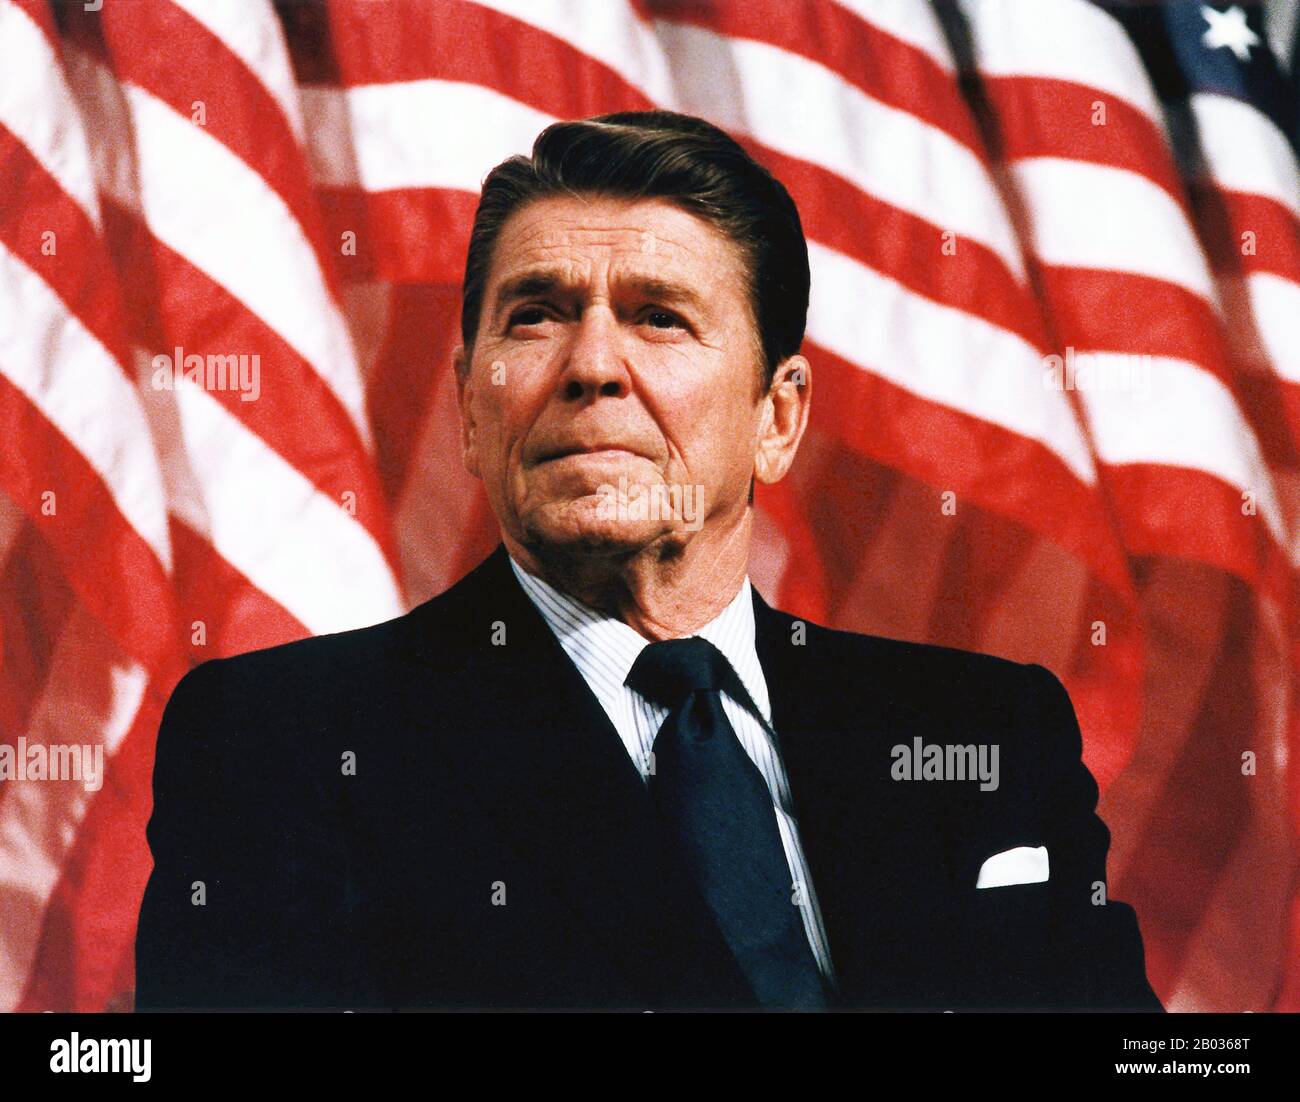 Ronald Wilson Reagan (February 6, 1911 – June 5, 2004, Republican) was an American politician and actor who was the 40th President of the United States, from 1981 to 1989.   Before his presidency, he was the 33rd Governor of California, from 1967 to 1975, after a career as a Hollywood actor and union leader. Stock Photo